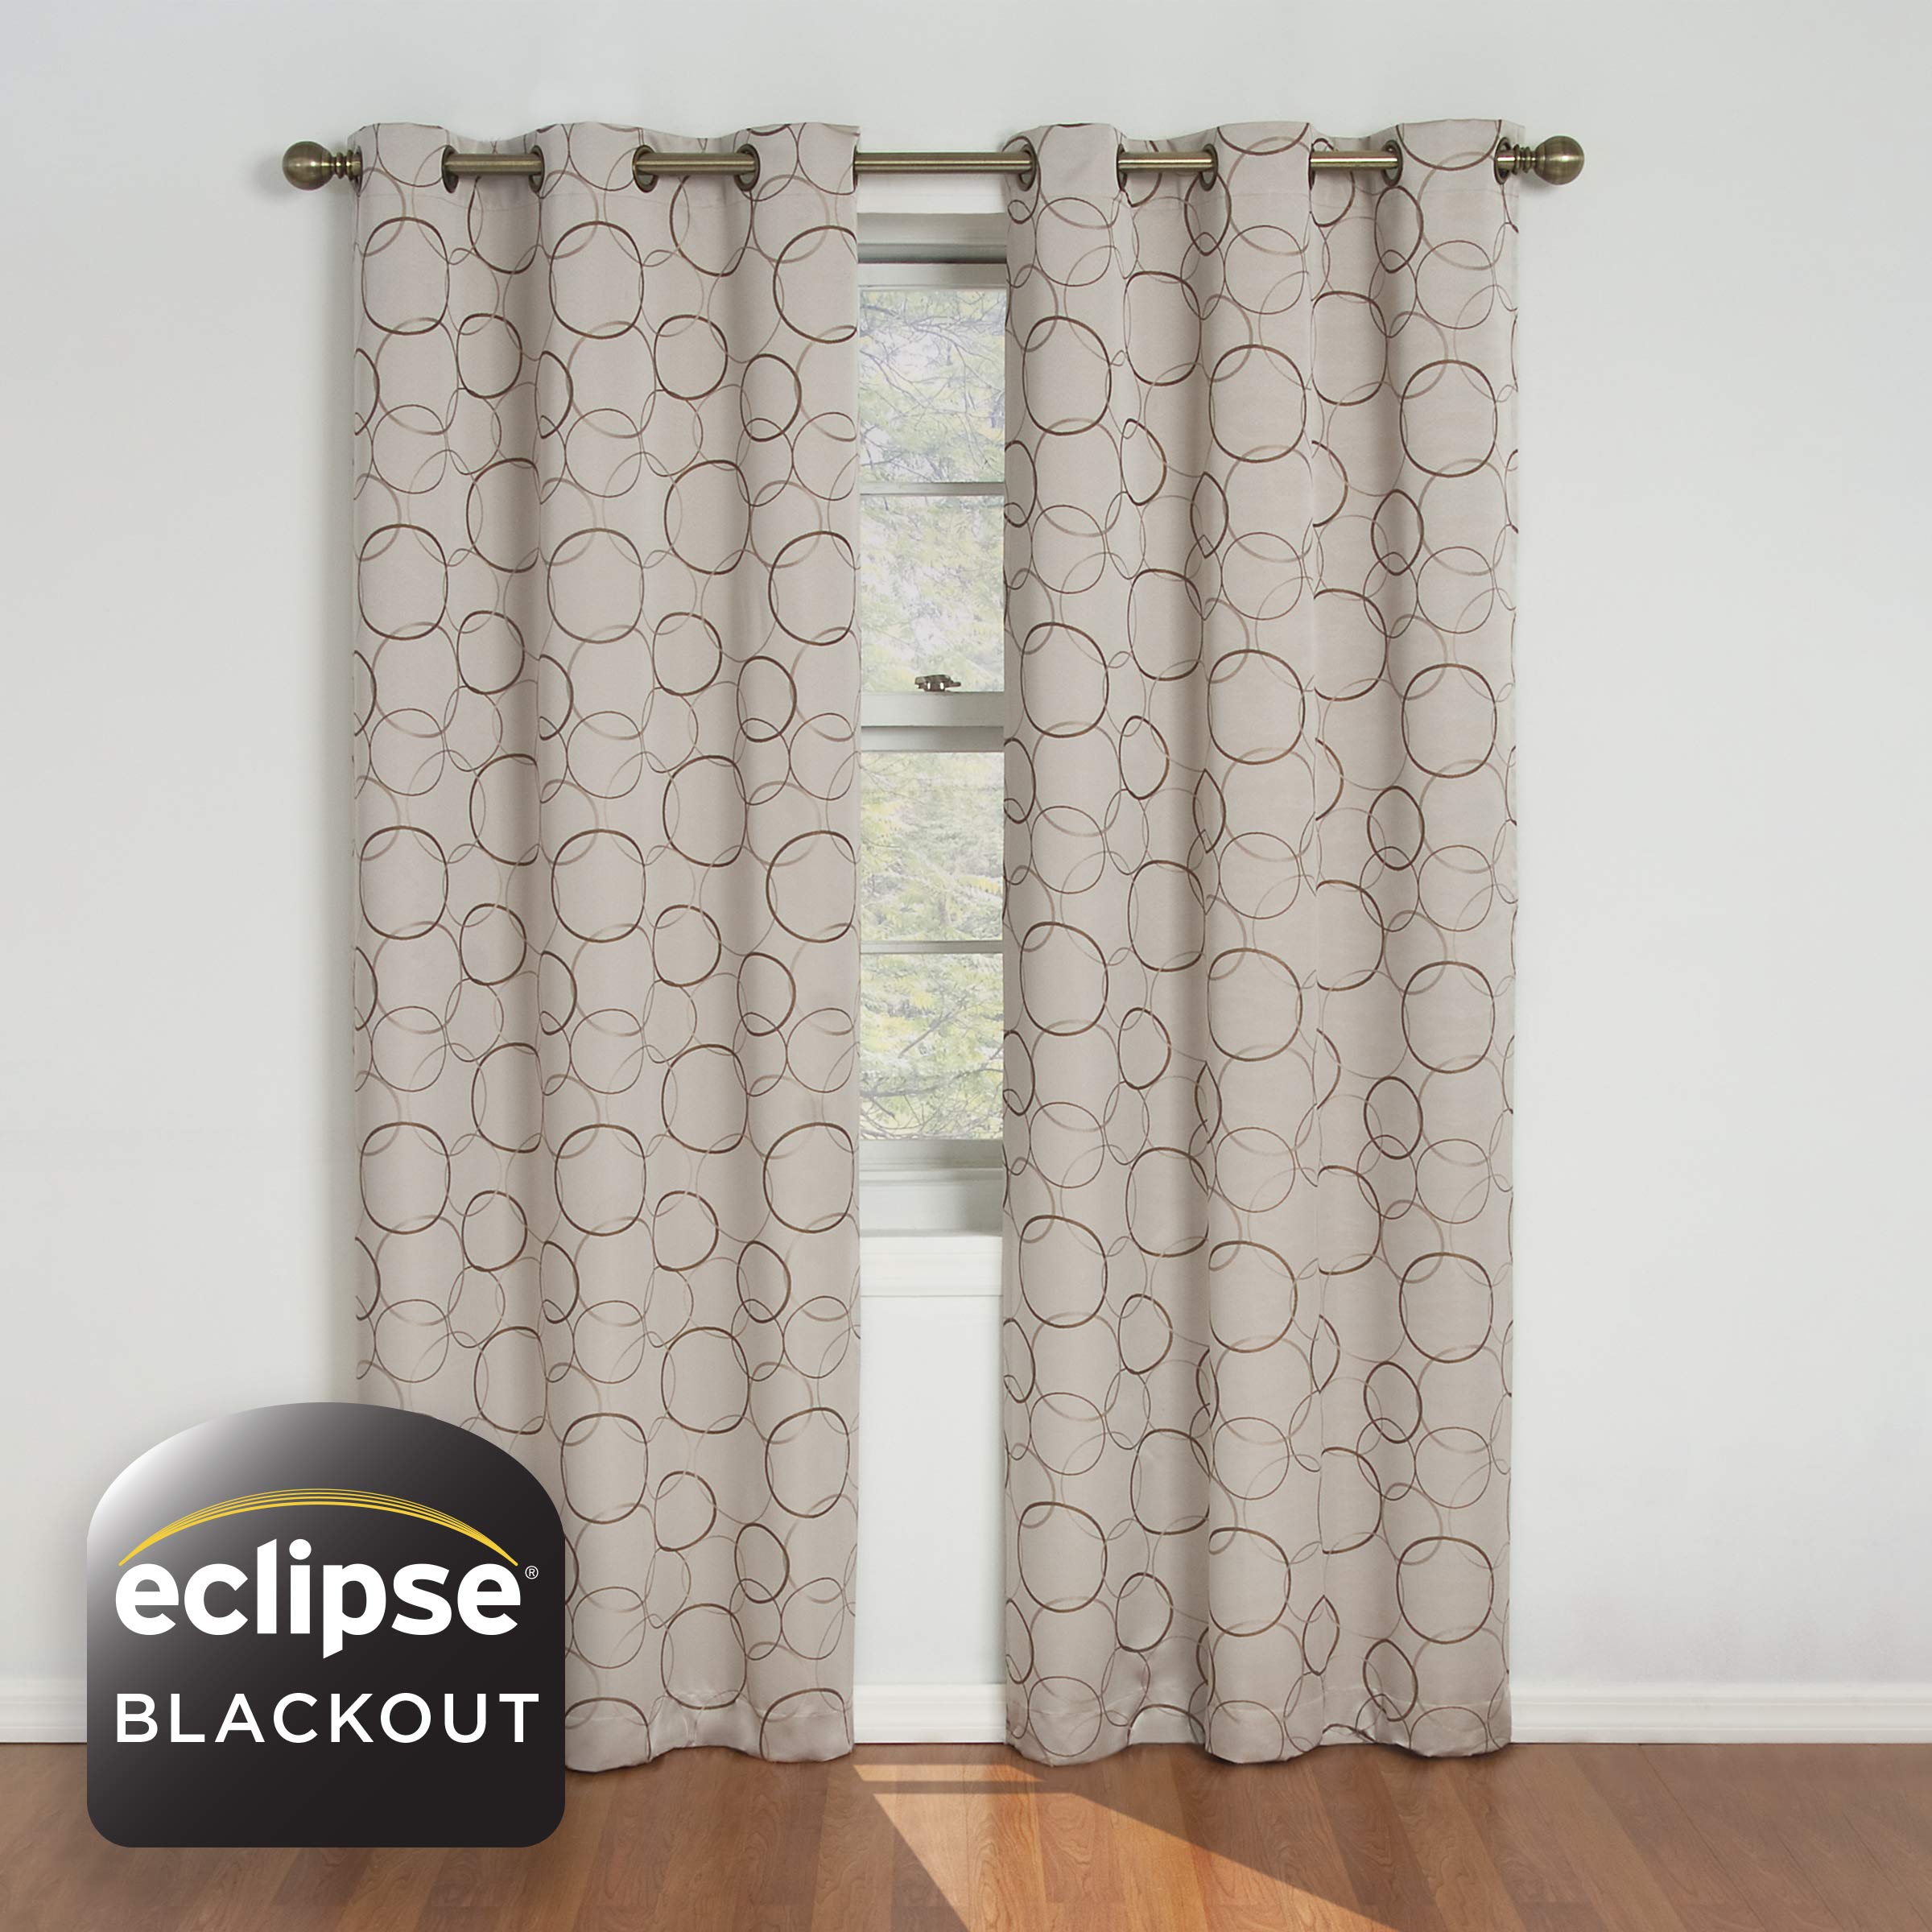 42" x 84" ECLIPSE Meridian Modern Single Panel Blackout Window Curtain (Linen, Thermal, Grommet) $8.39 + Free Shipping w/ Prime or on $25+